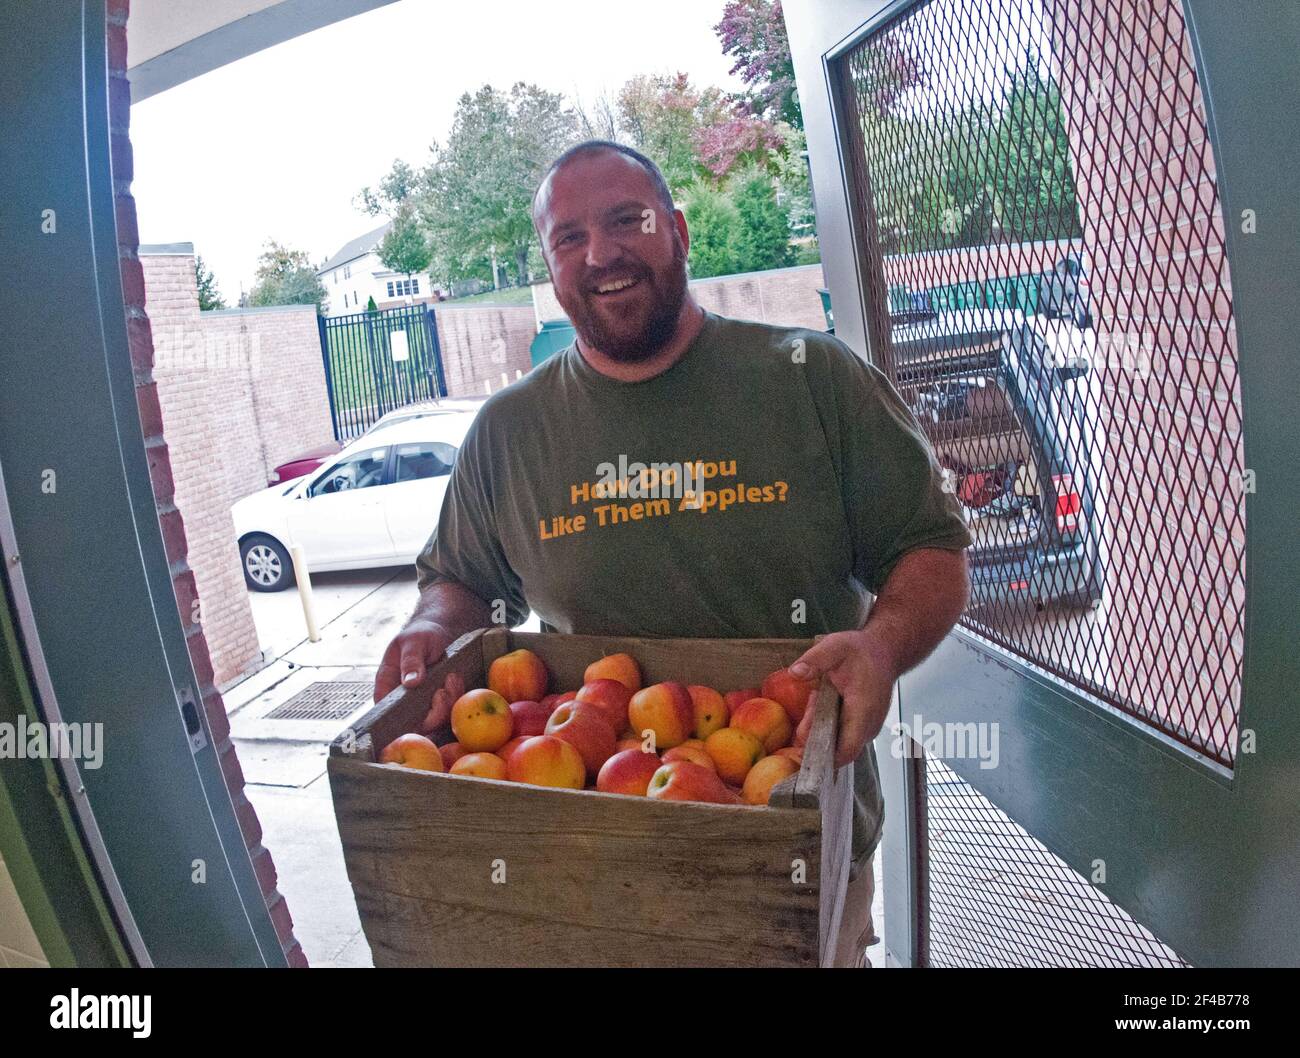 Bigg Riggs Farm owner Calvin Riggleman brought three varieties of apples in several crates to Nottingham Elementary School in Arlington, VA, for a National School Lunch Week event on Wednesday, October 12, 2011. Farmers from Bigg Riggs Farm in Hampshire County, WV, and Maple Avenue Market Farm in Vienna, VA were very popular with the students. Today's menu included roasted chicken, roasted butternut squash with dried cranberries, farm fresh mixed lettuce salad, turkey wraps, pita wedges, hot muffins, carrots, asian pears and more. Stock Photo